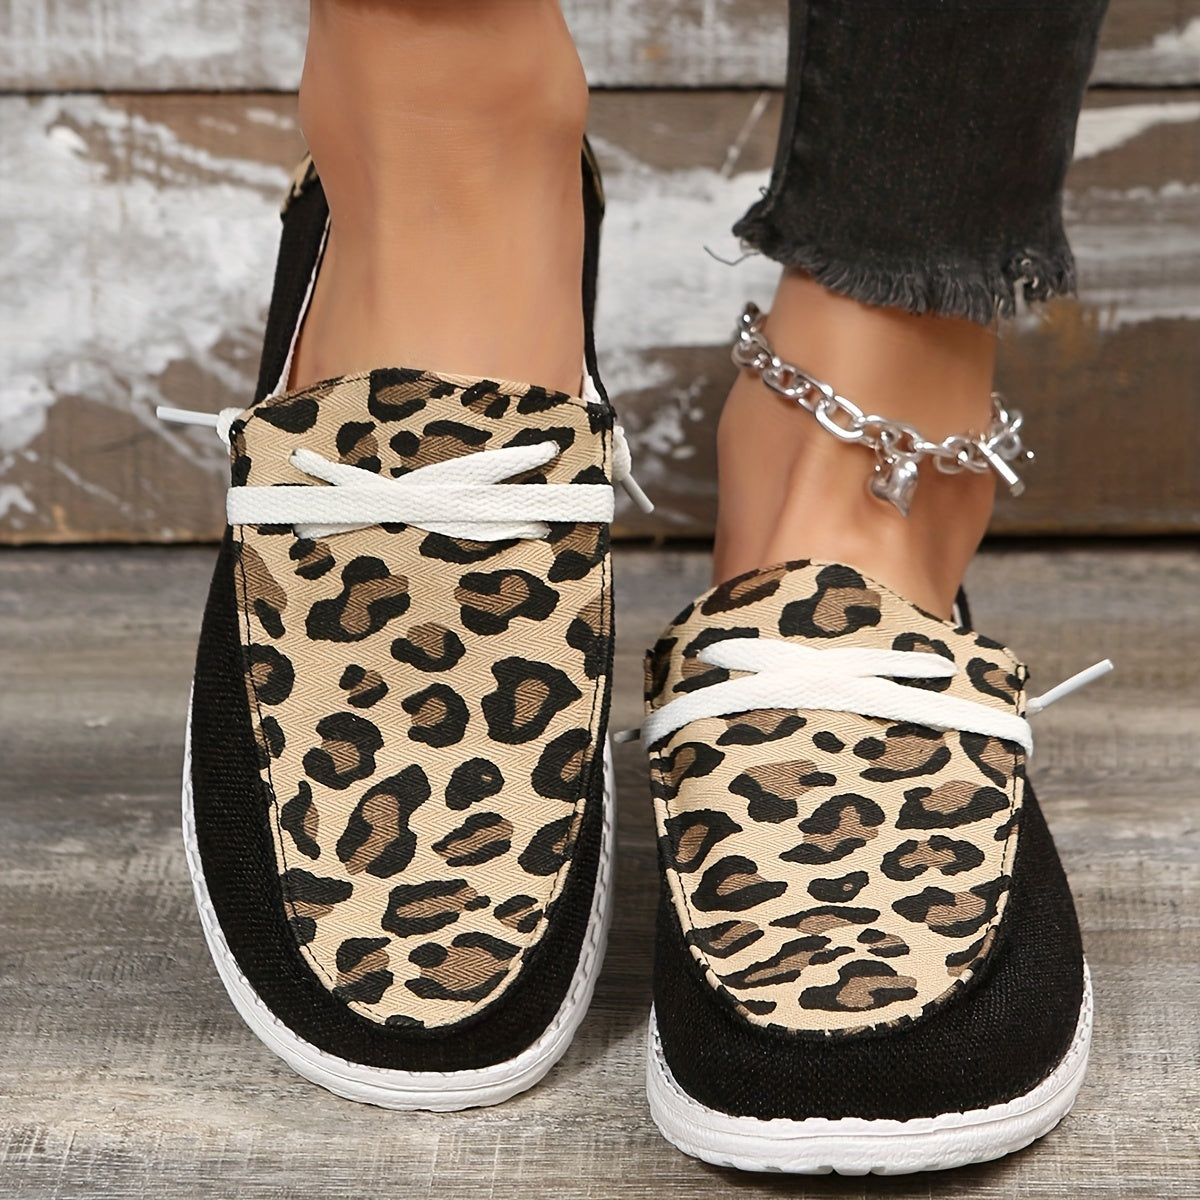 Leopard Printed Canvas Shoes, Casual Lace Up Sneakers